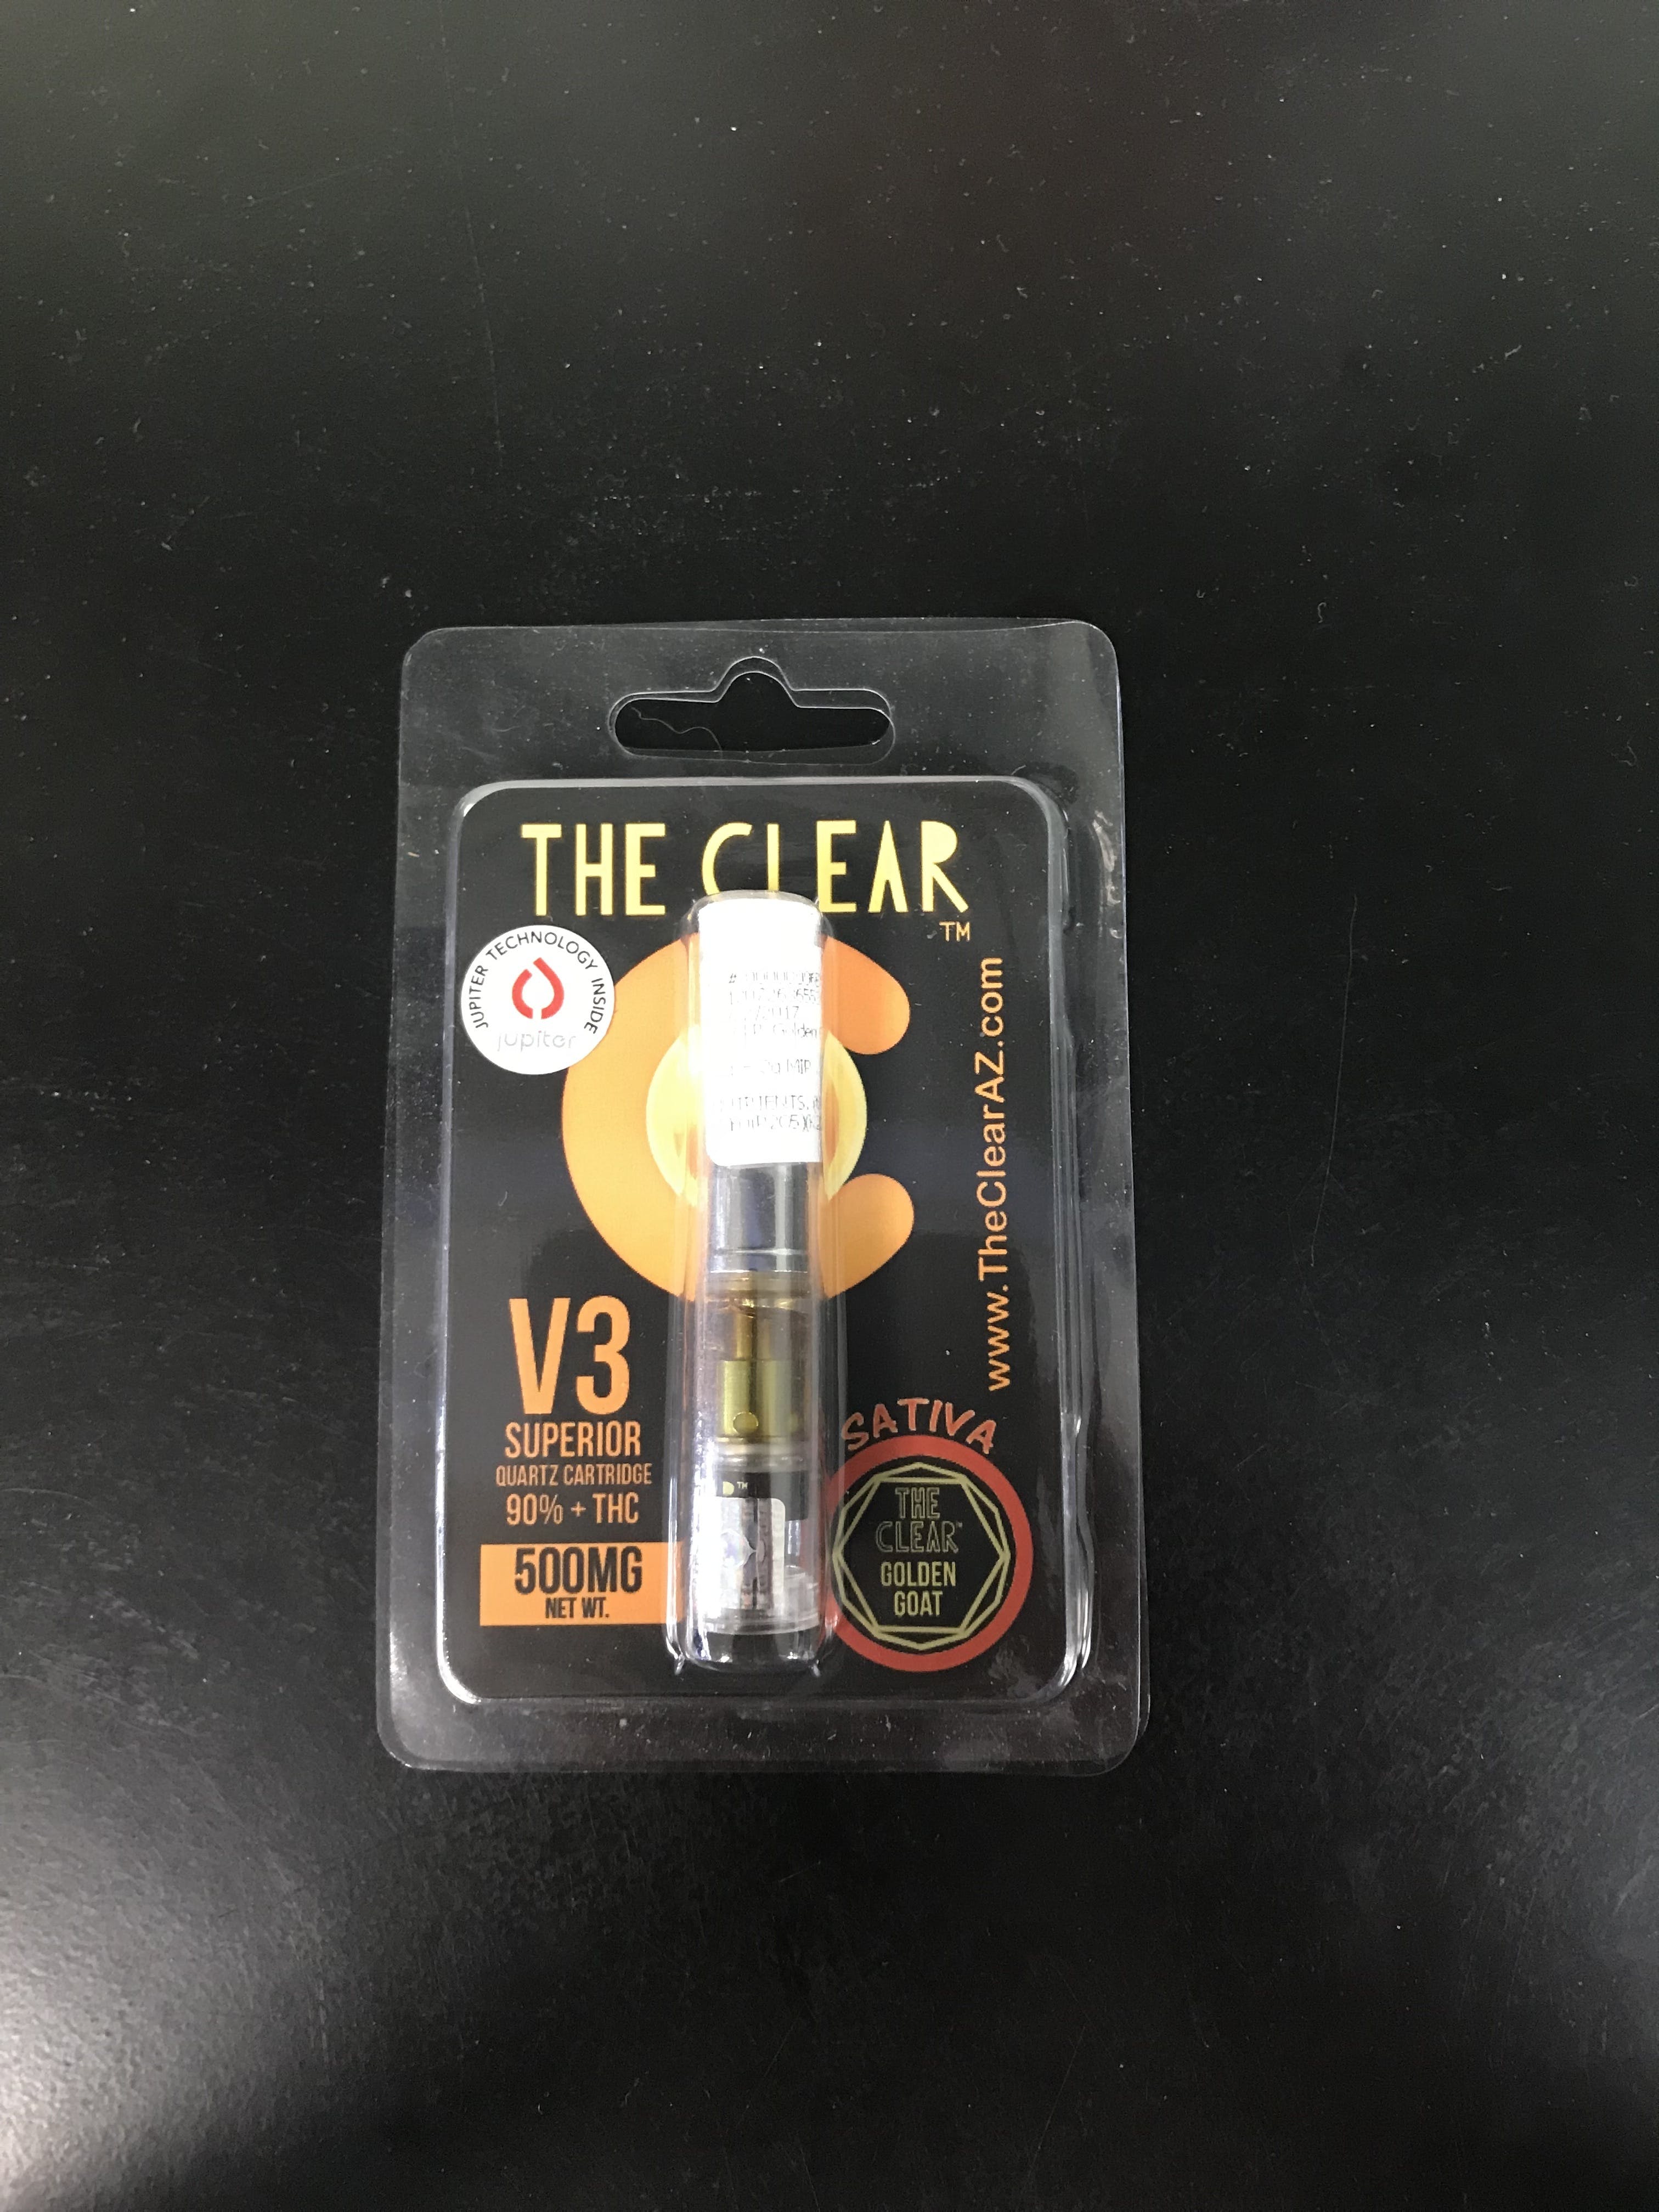 concentrate-the-clear-v3-golden-goat-500mg-cartridge